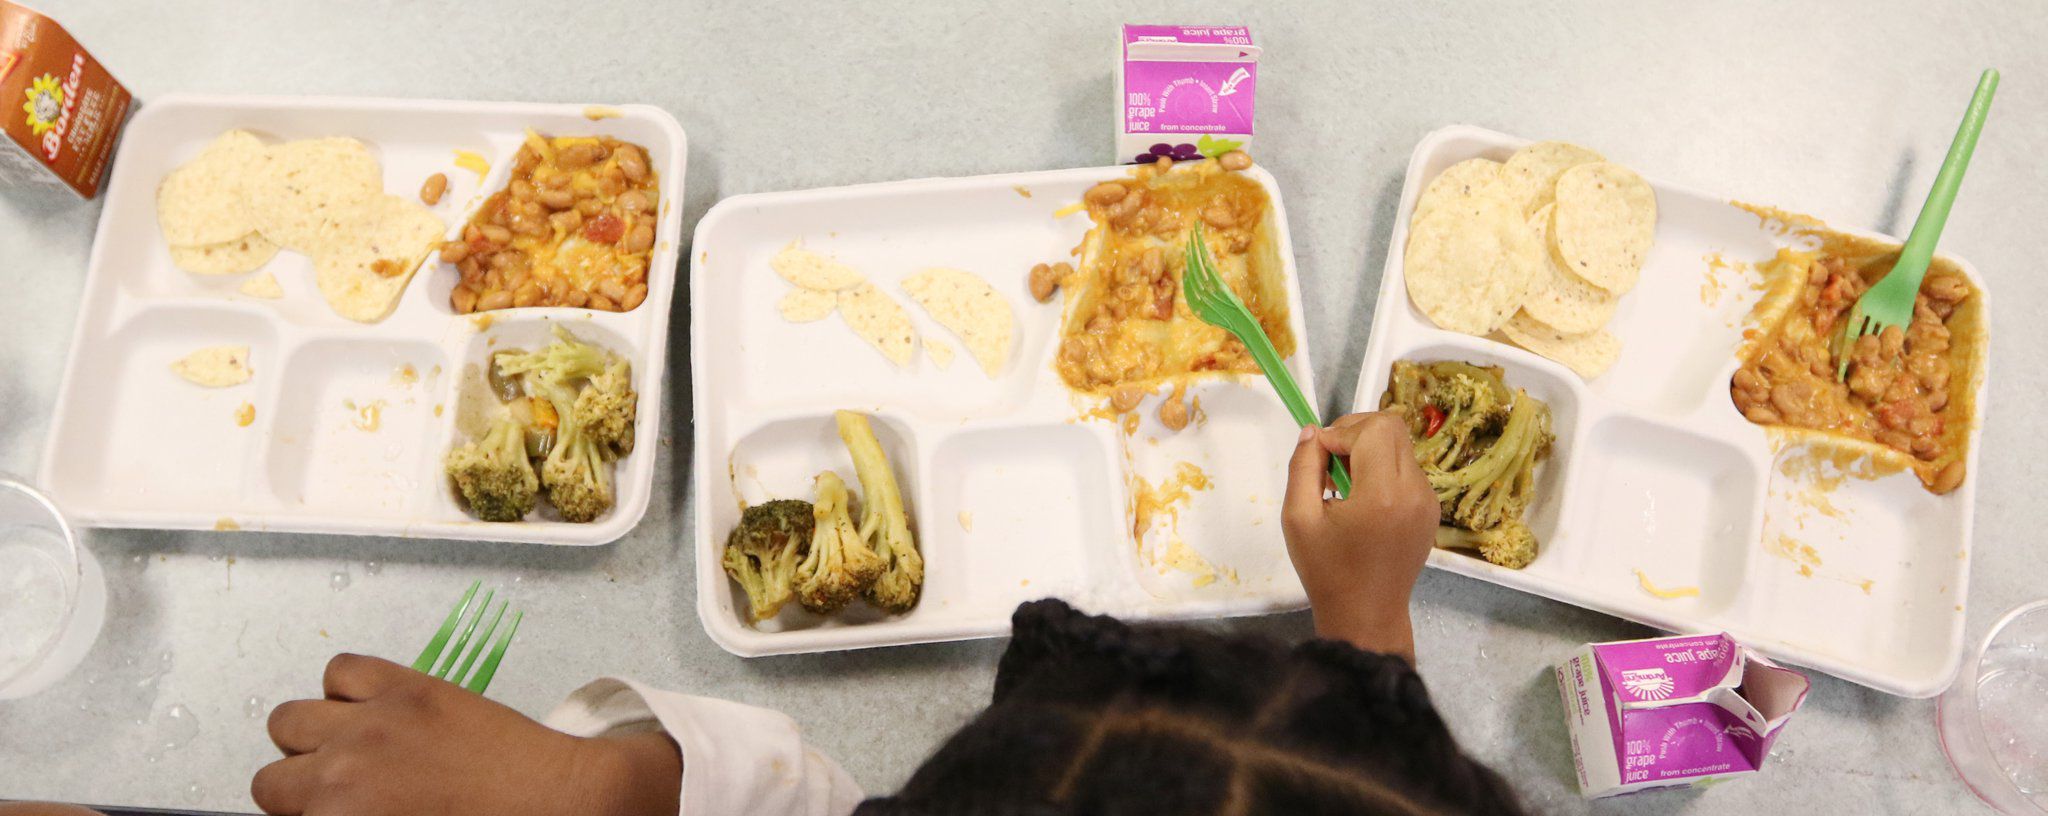 Schools plan to replace Styrofoam lunch trays